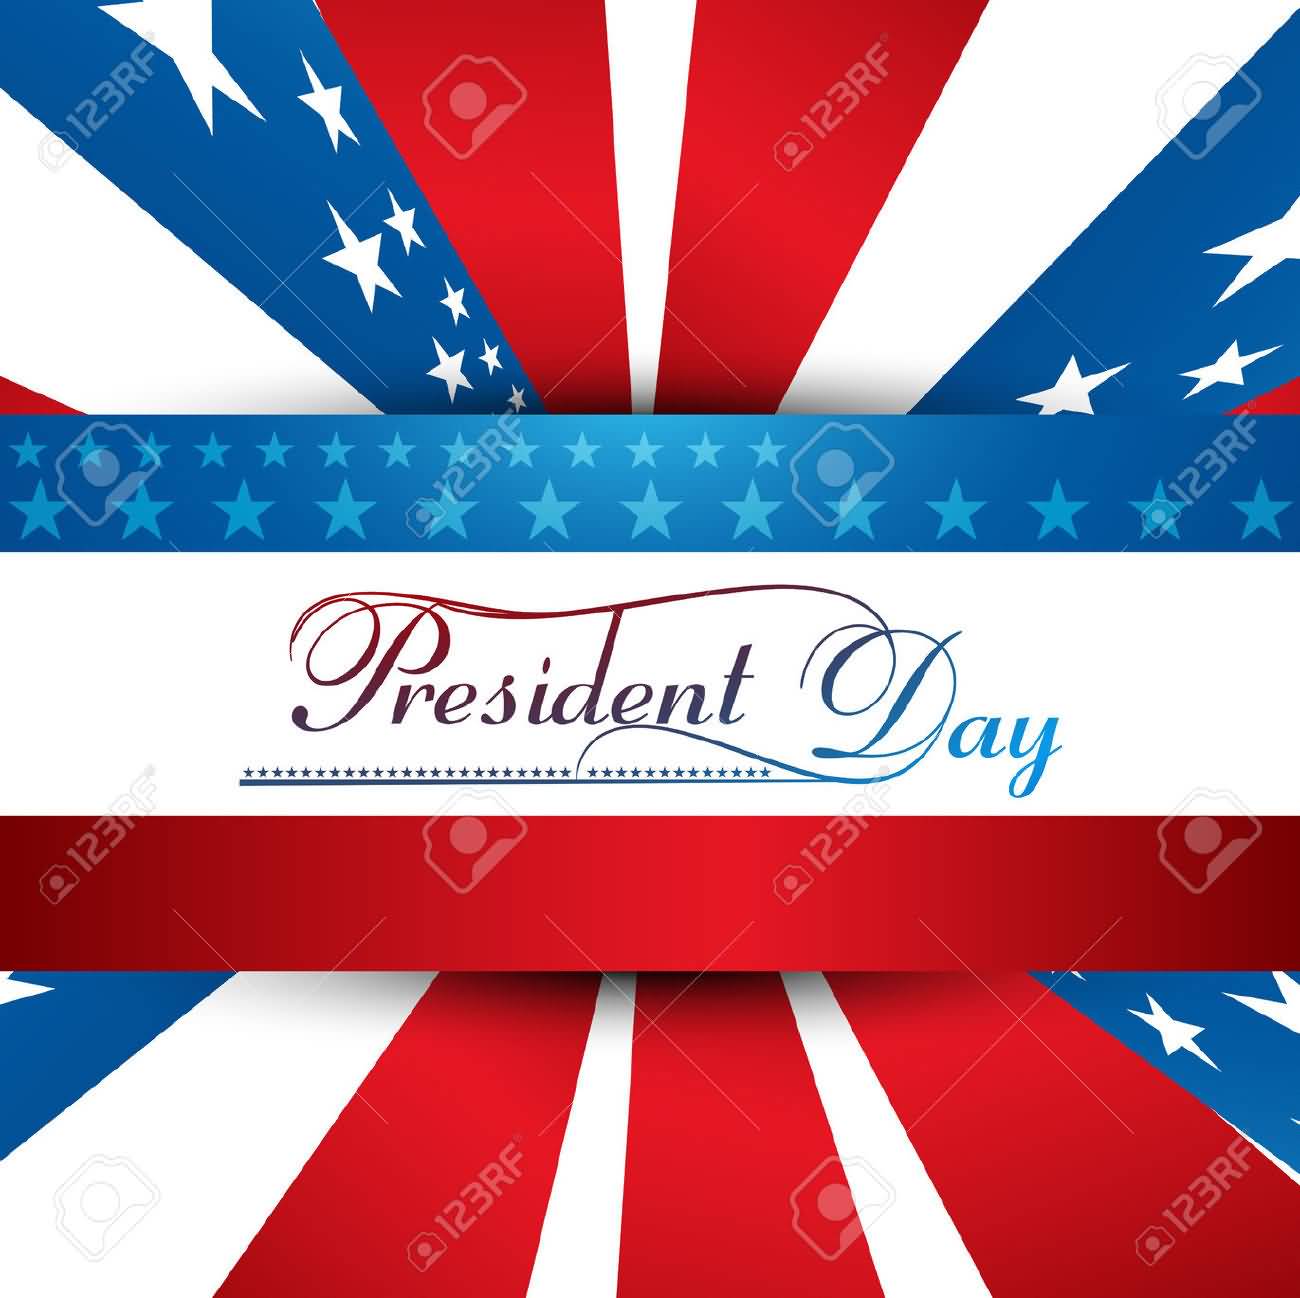 Presidents Day America Greeting Card